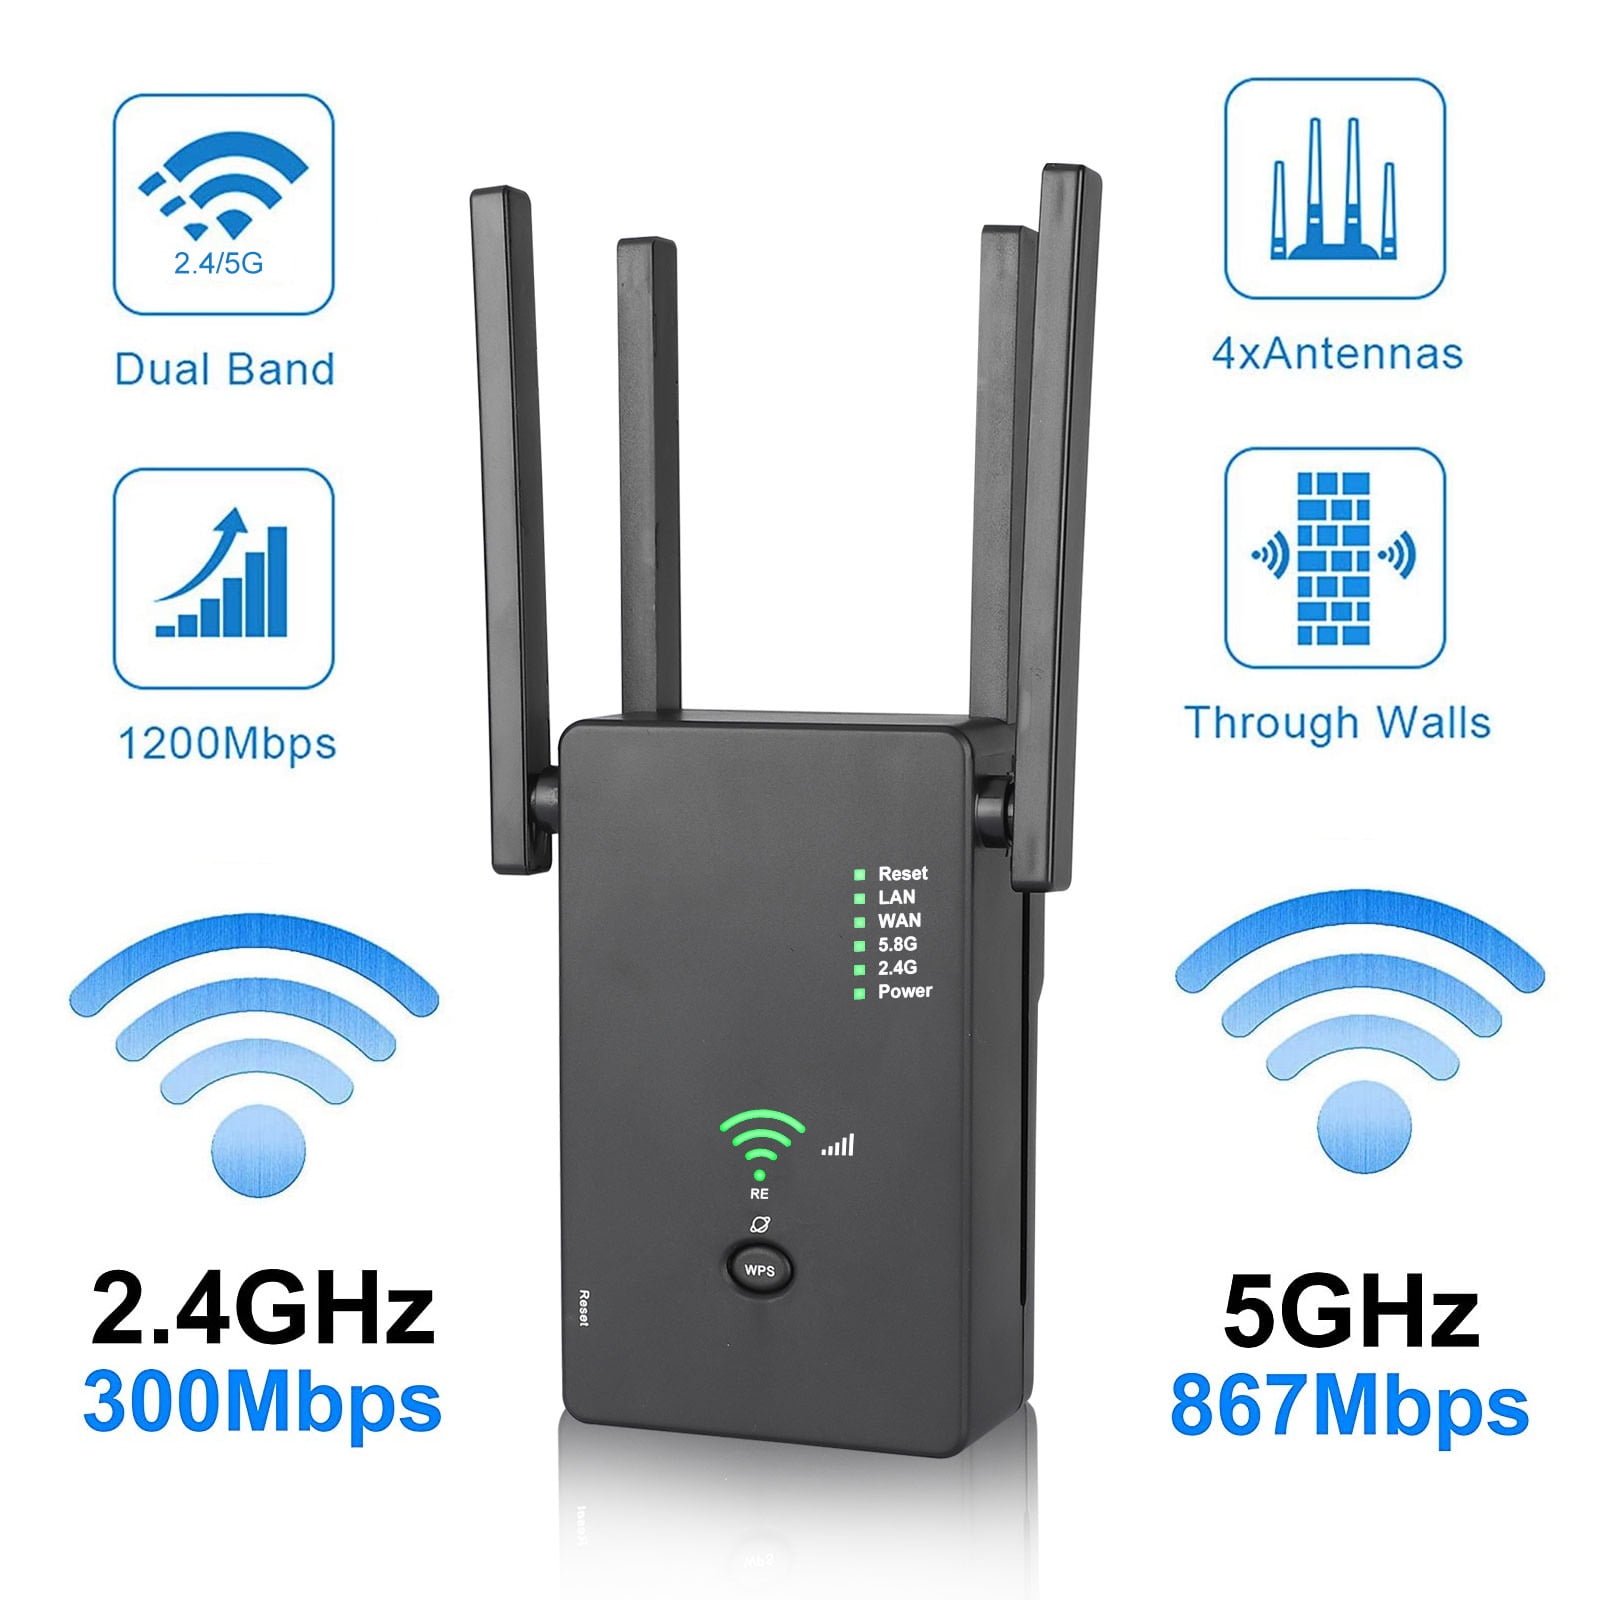 NEW WiFi Range Extender 1200Mbps AC1200 Booster dual band Repeater 4 Antenna US 